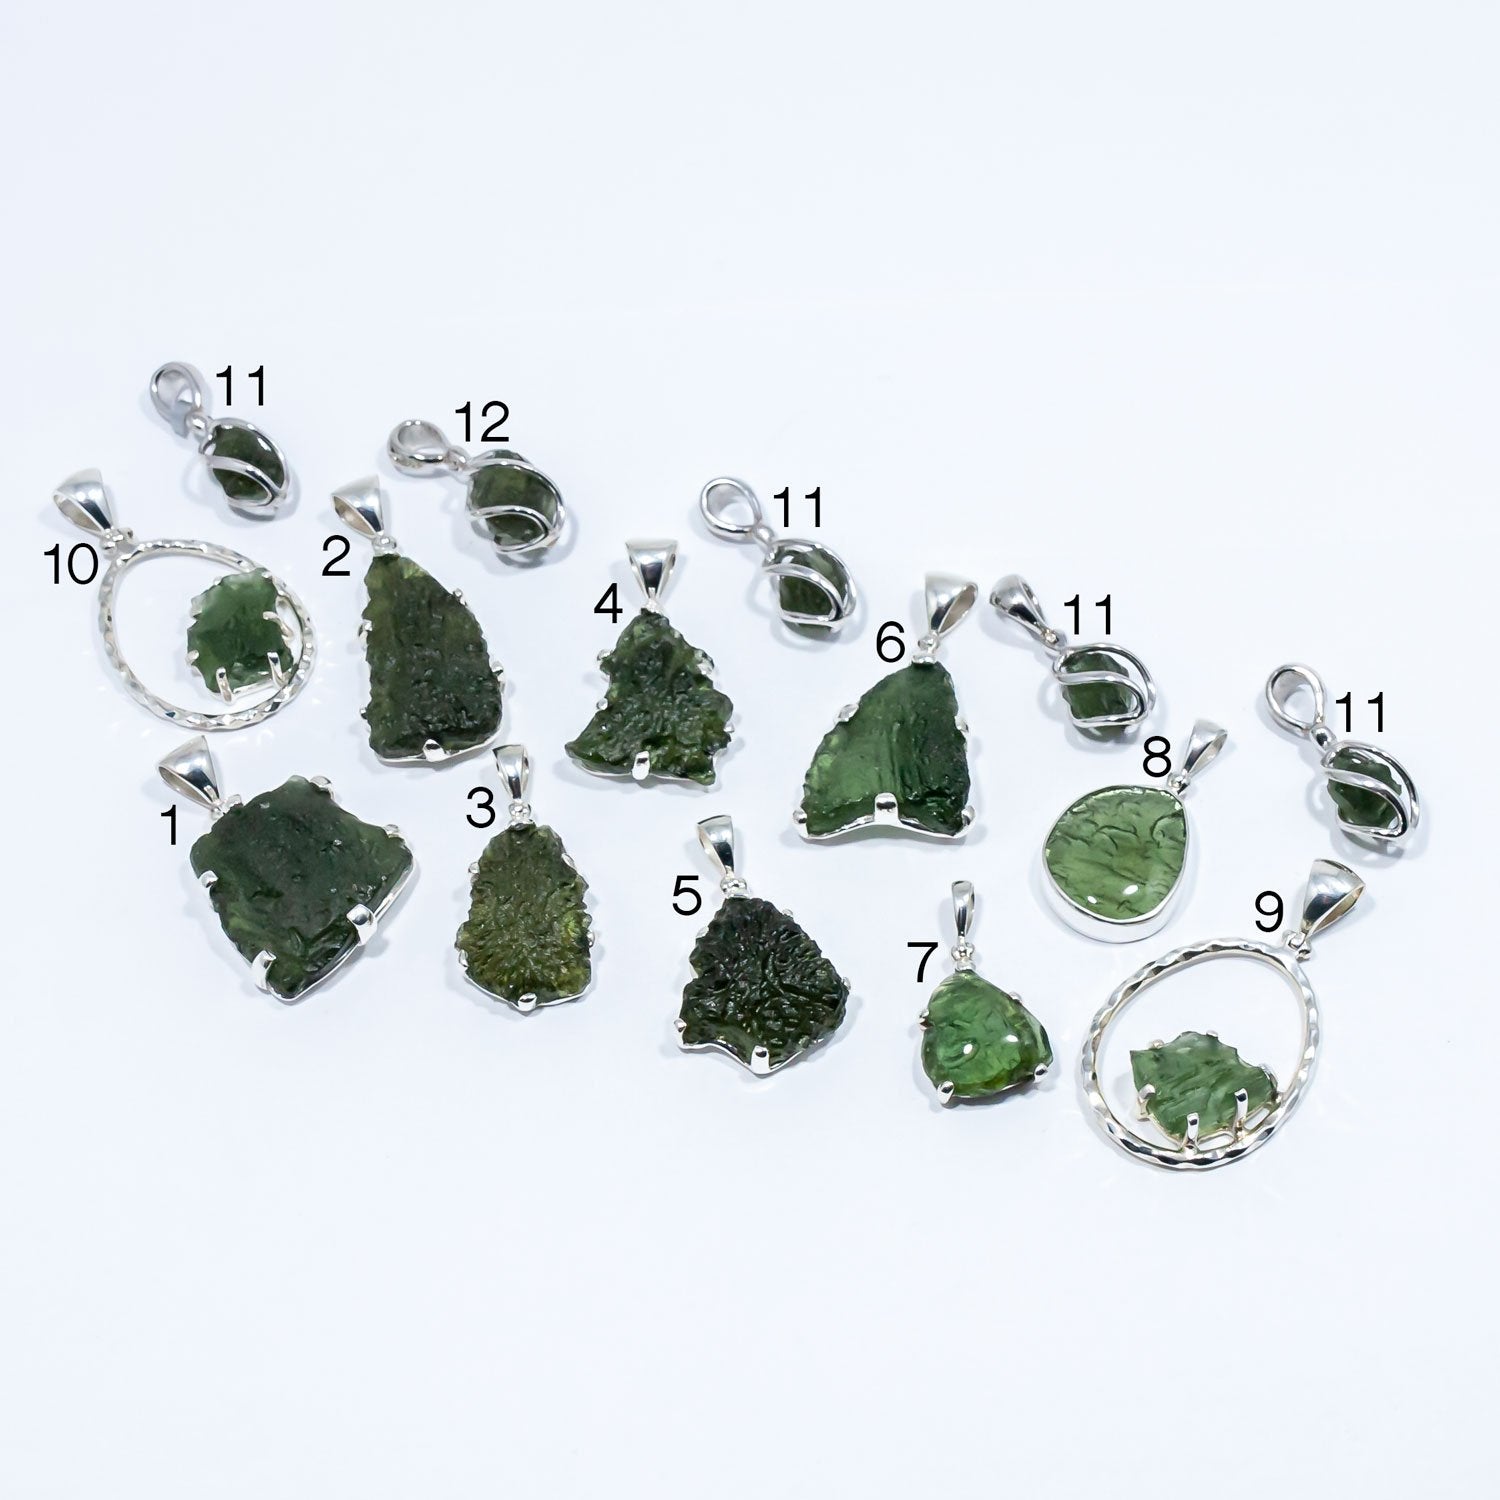 The moldavite pendants to choose from for the moldavite pendant necklace. Numbered 1-12